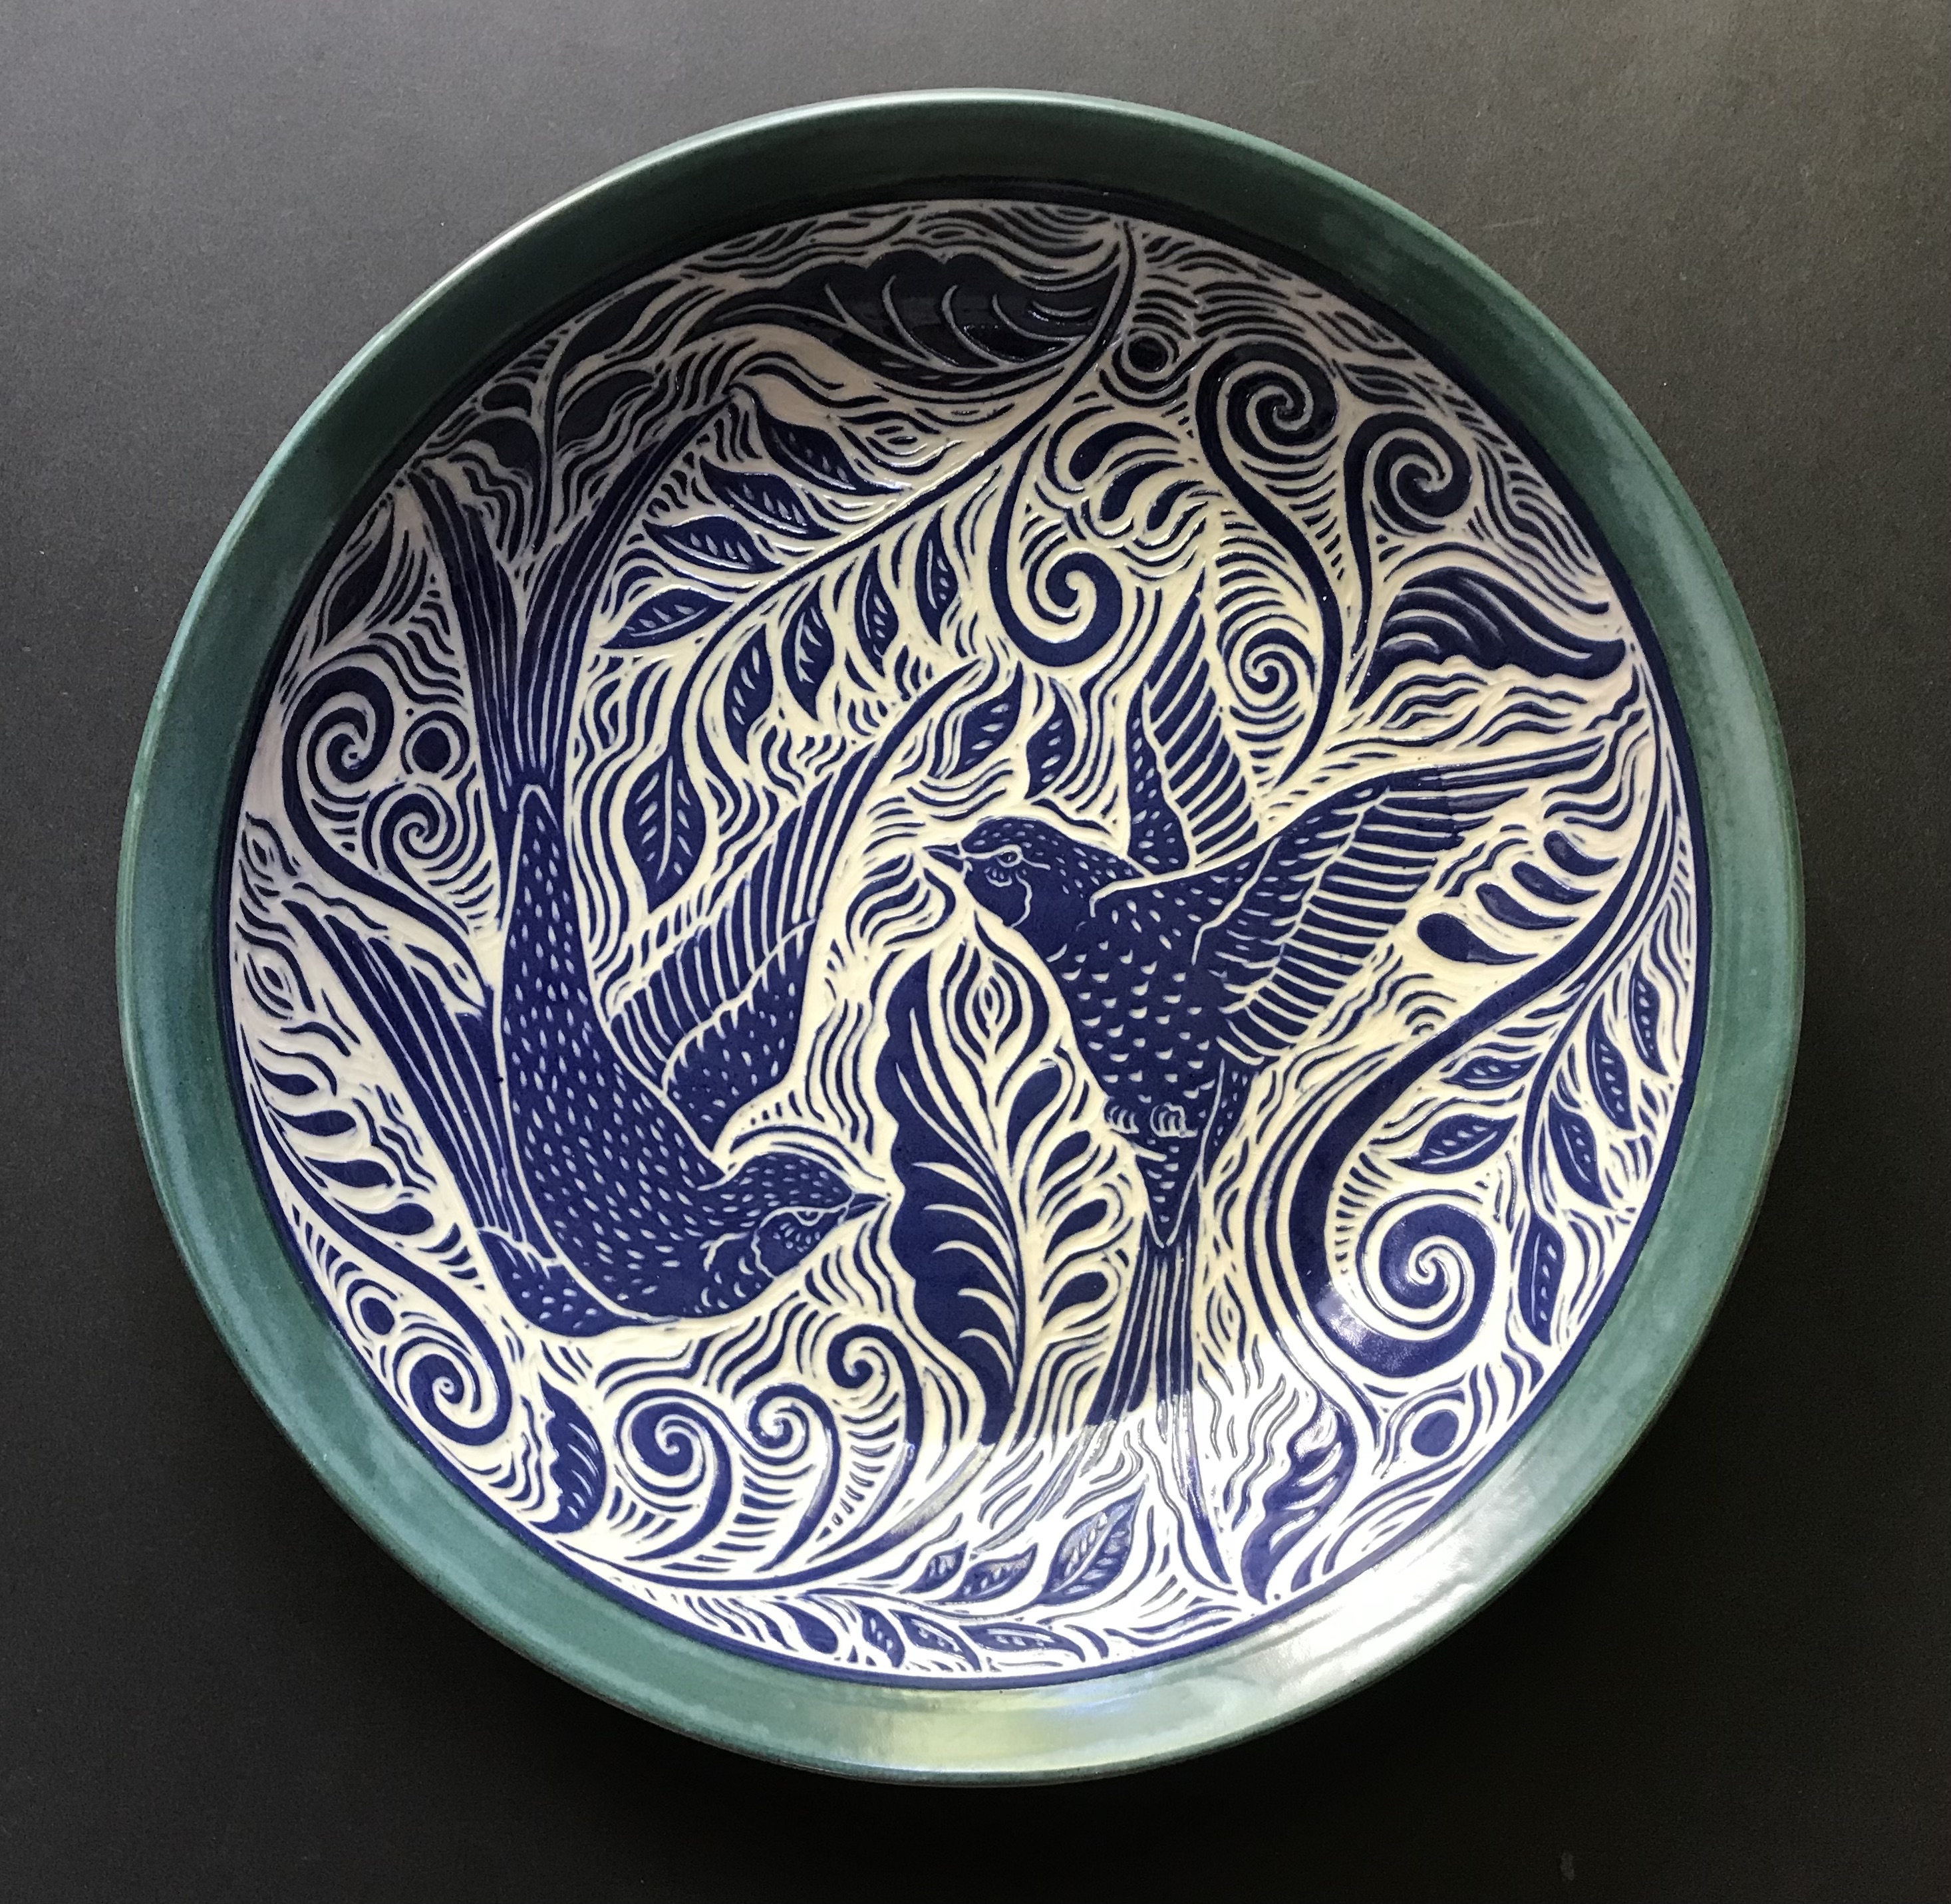 Ceramic Large Serving Bowl in Cobalt Blue, White, and Turquoise with Stylized Swallow Design